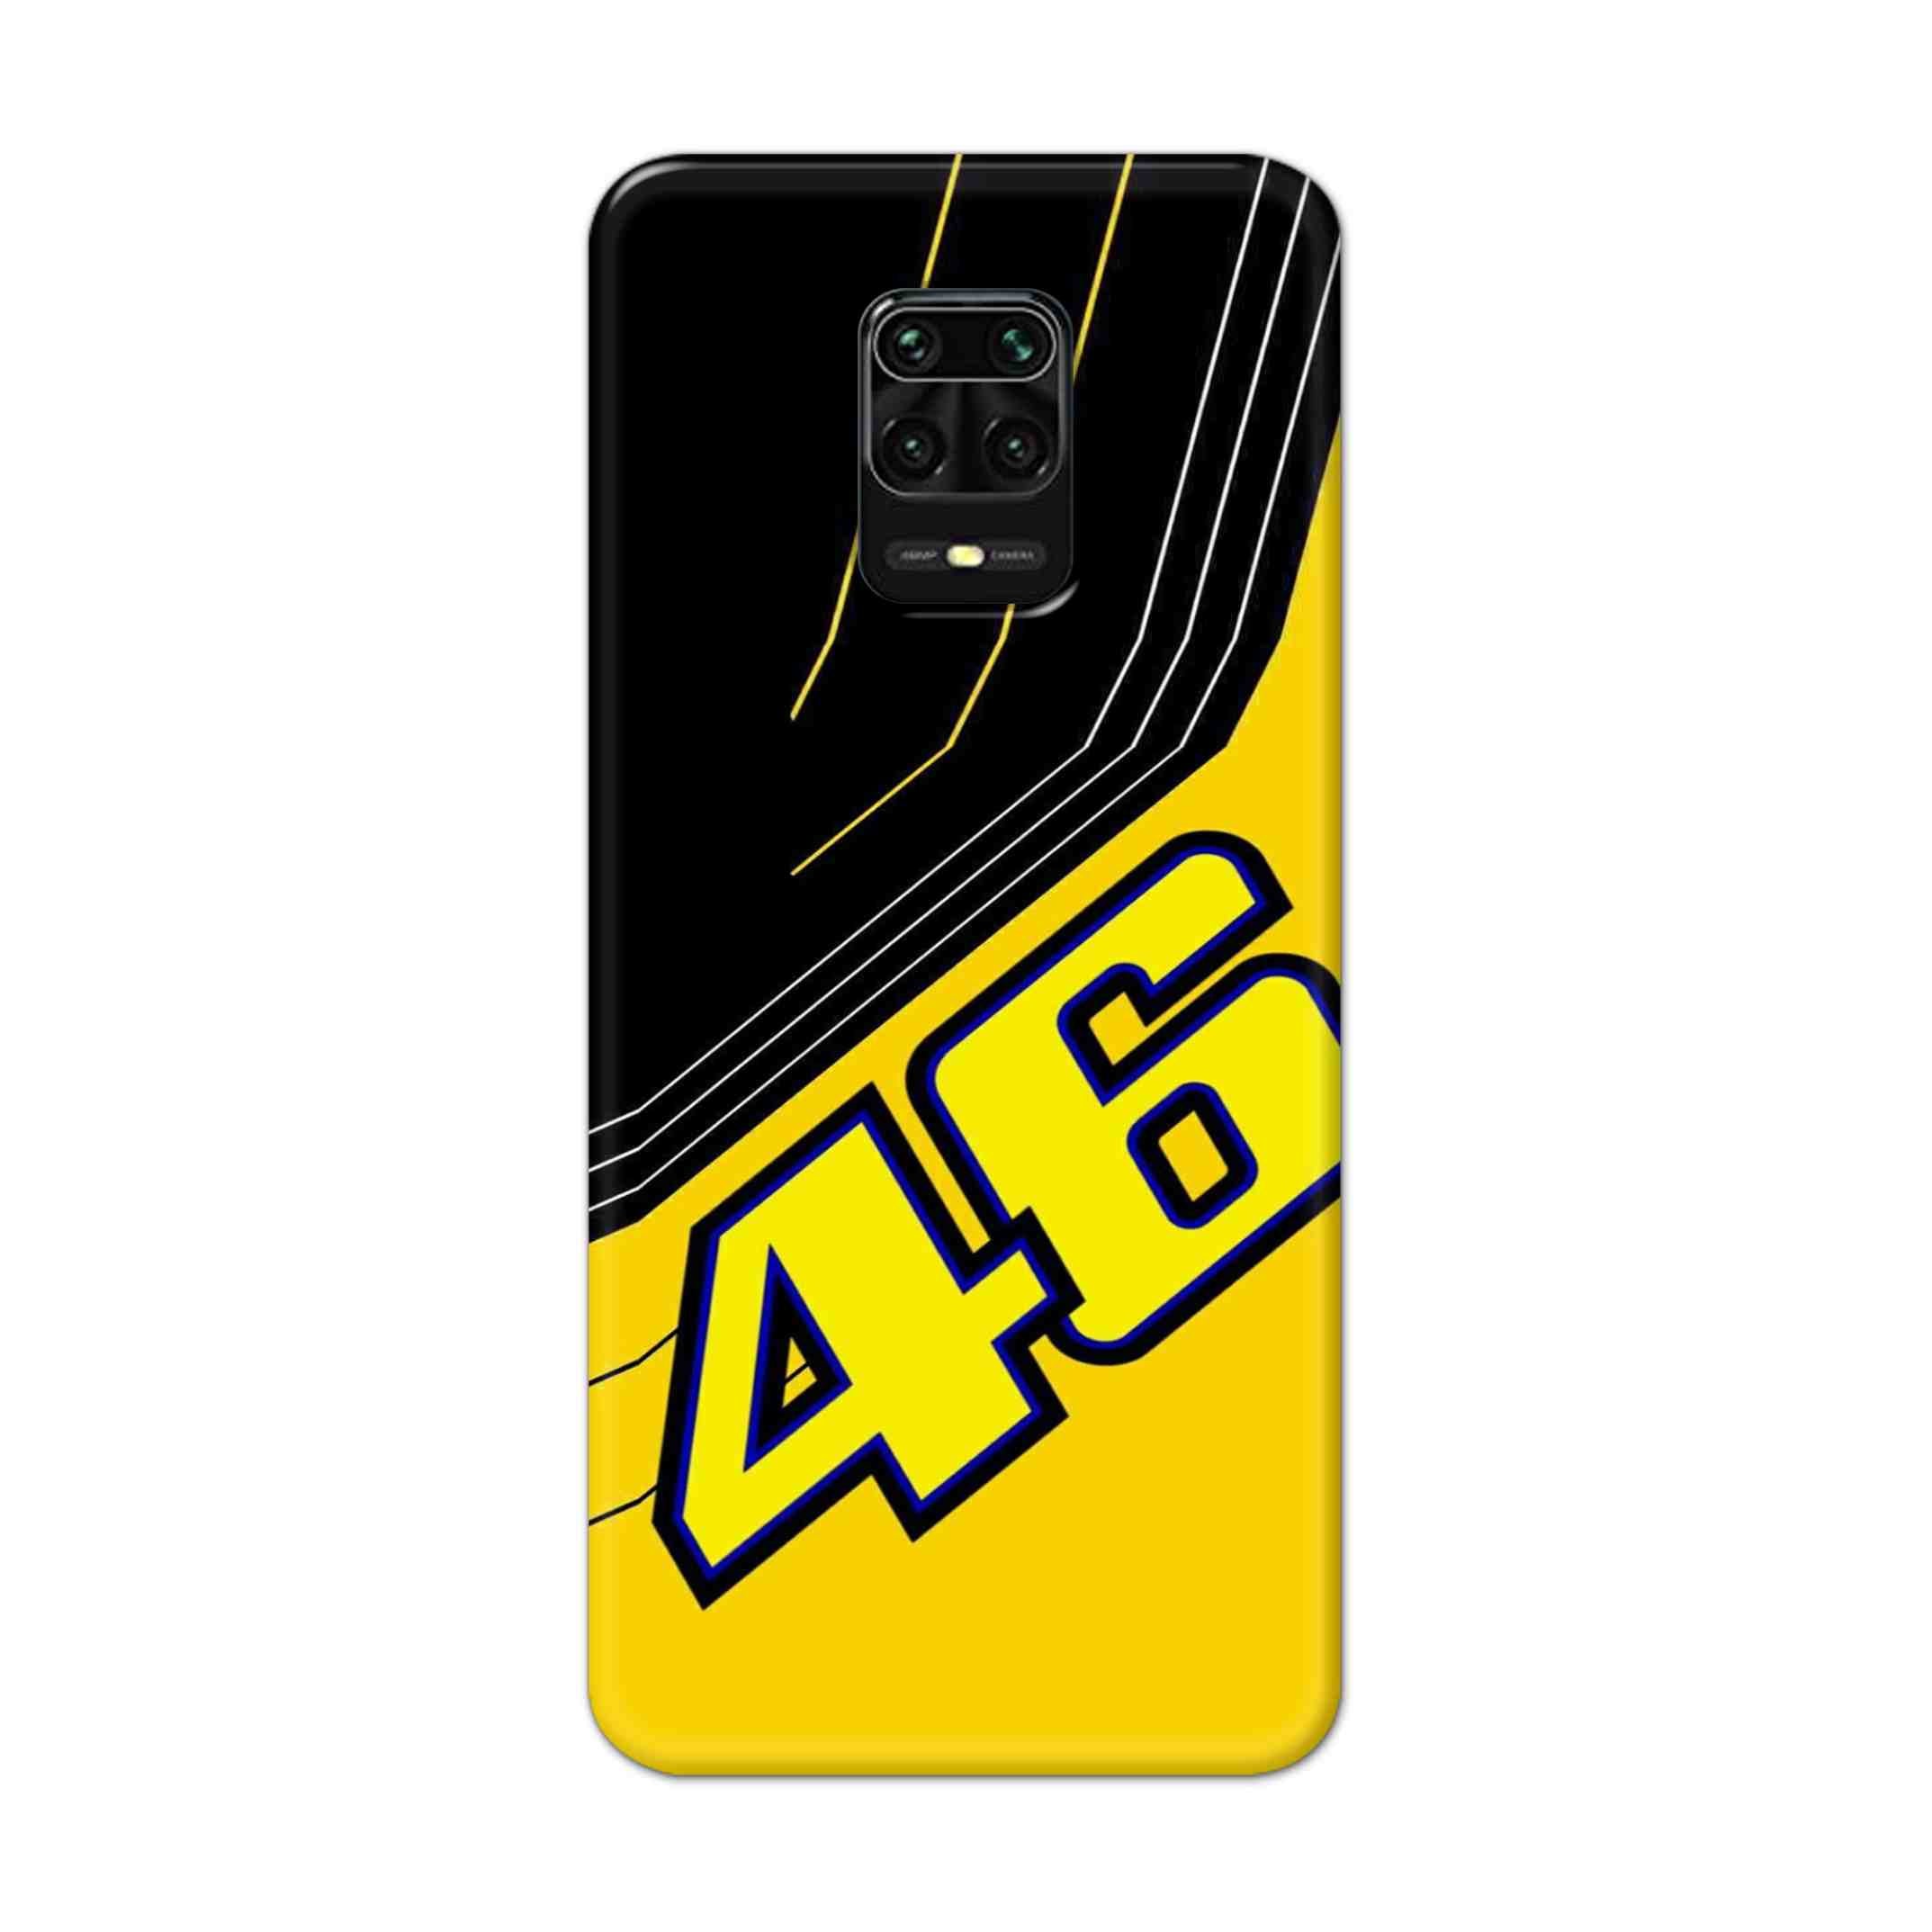 Buy 46 Hard Back Mobile Phone Case Cover For Redmi Note 9 Pro Online